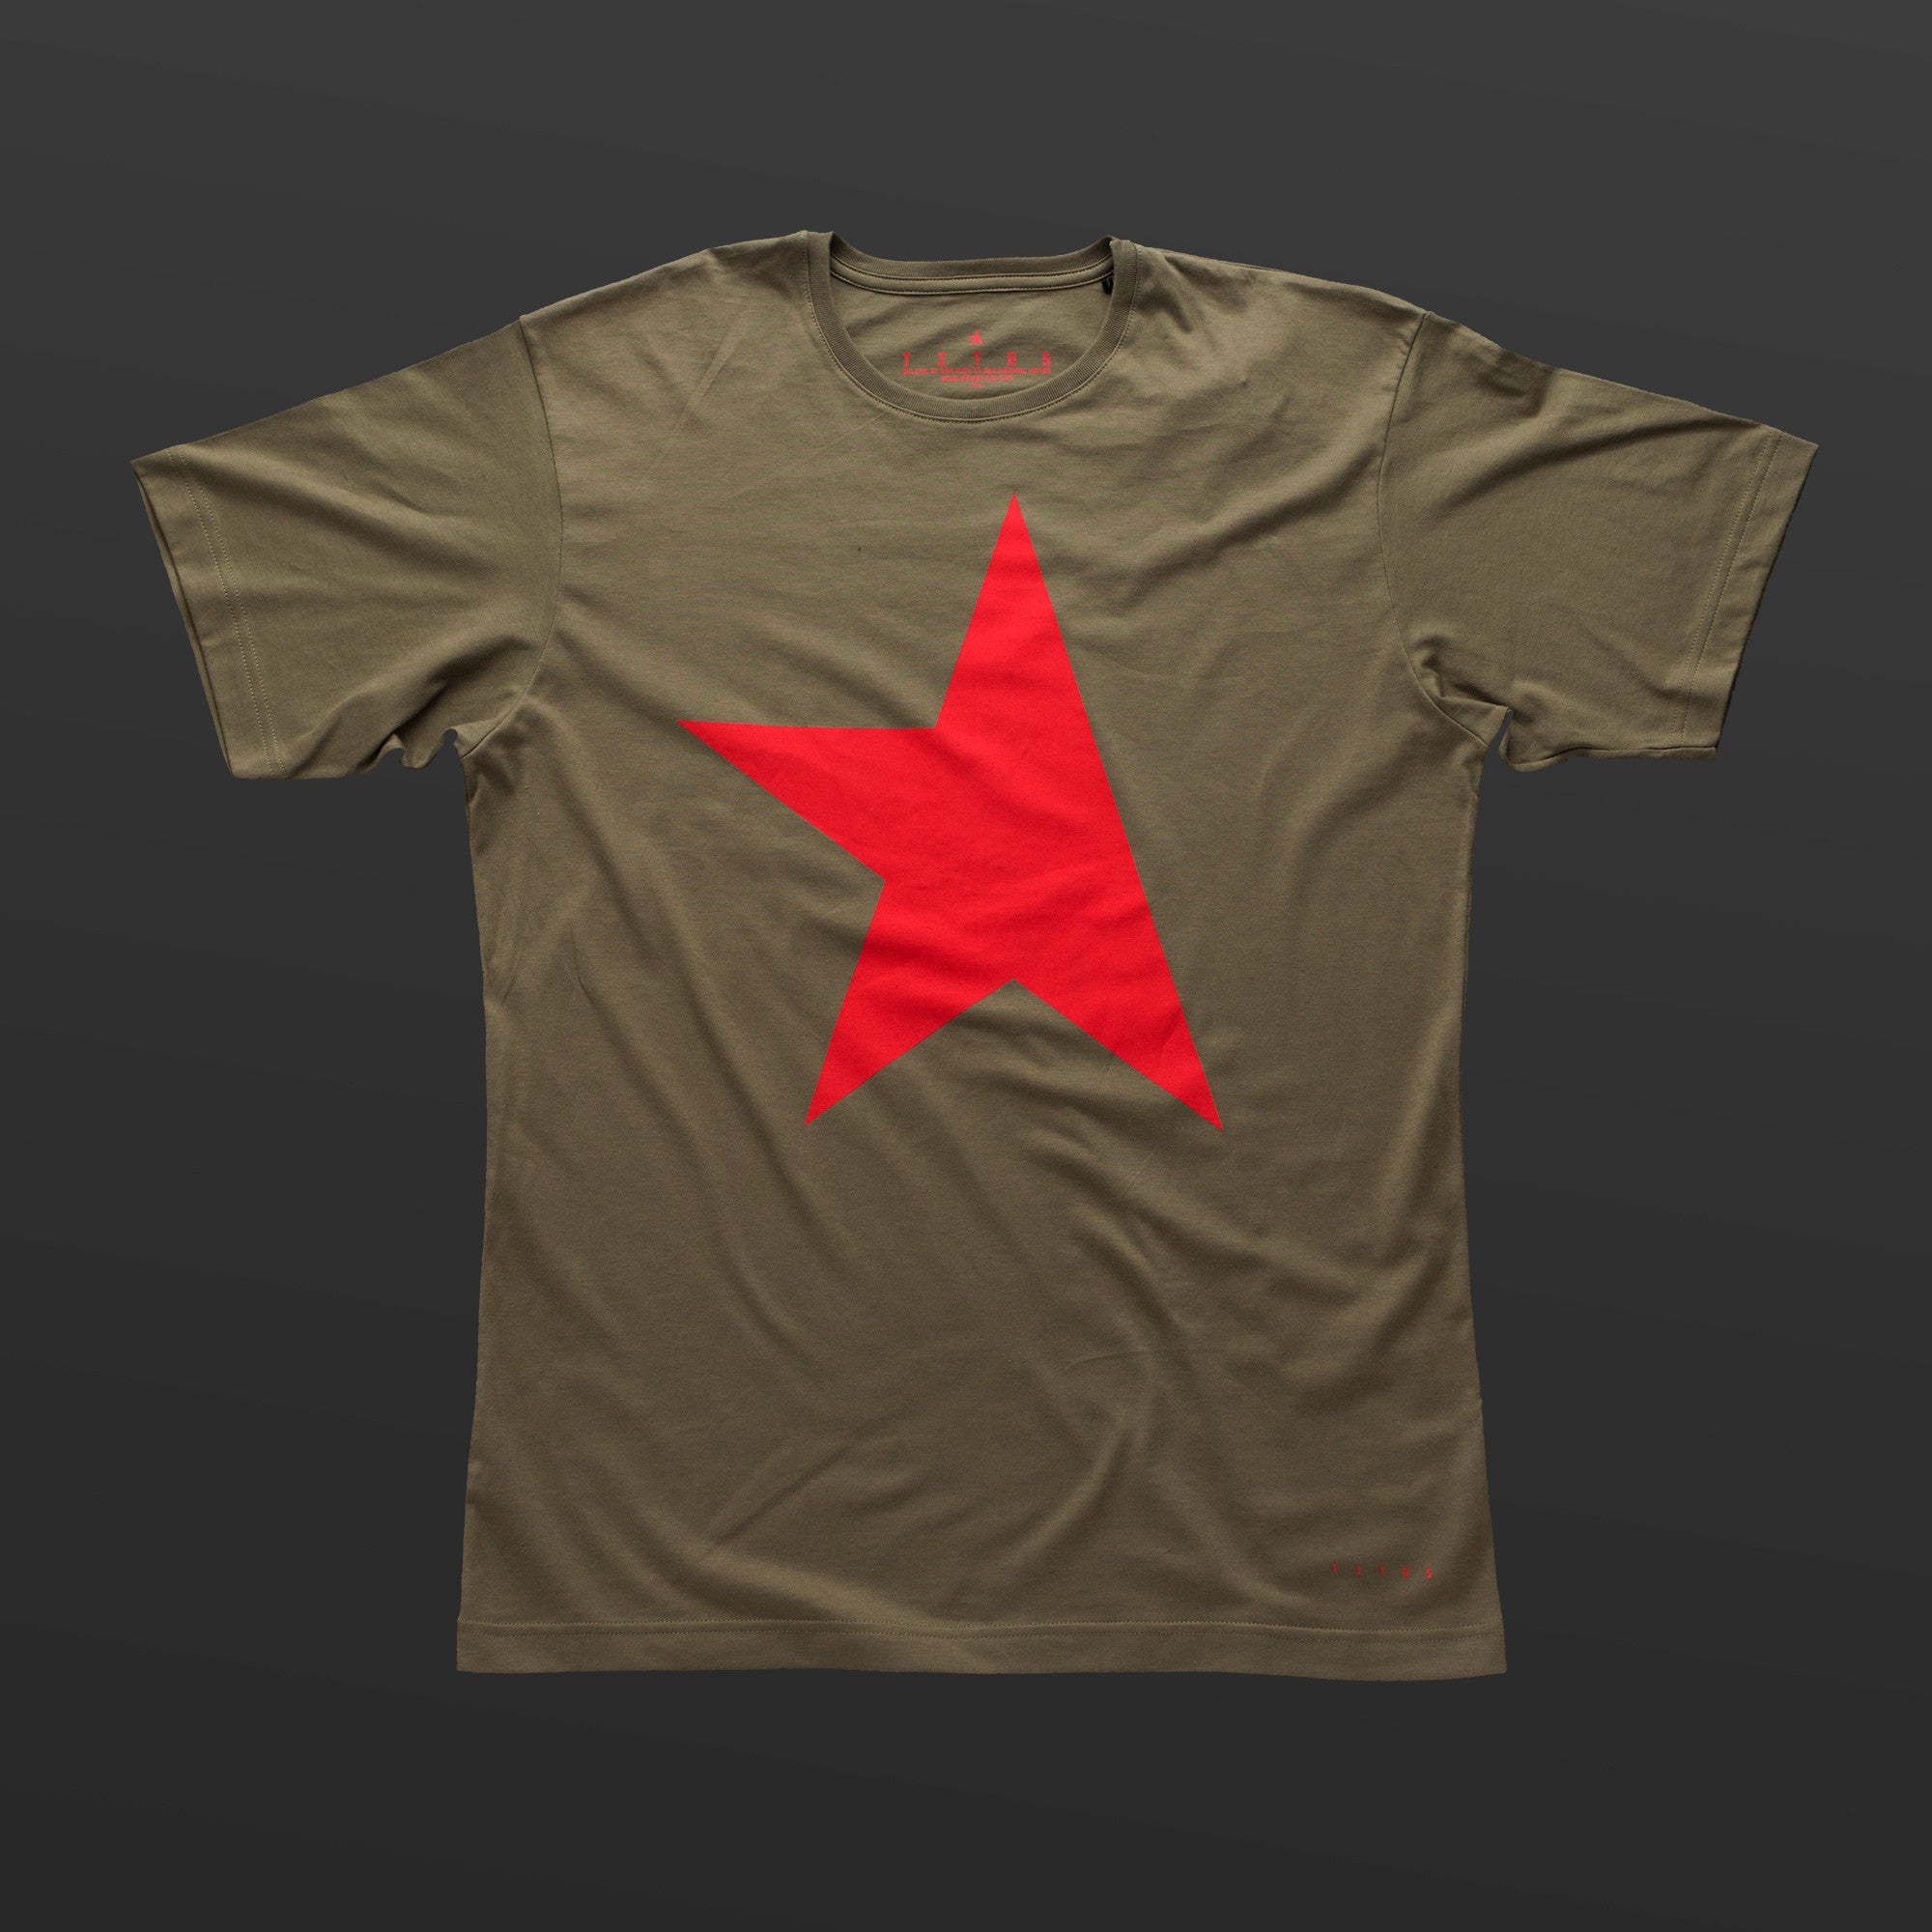 First T-shirt olive/red TITOS star logo